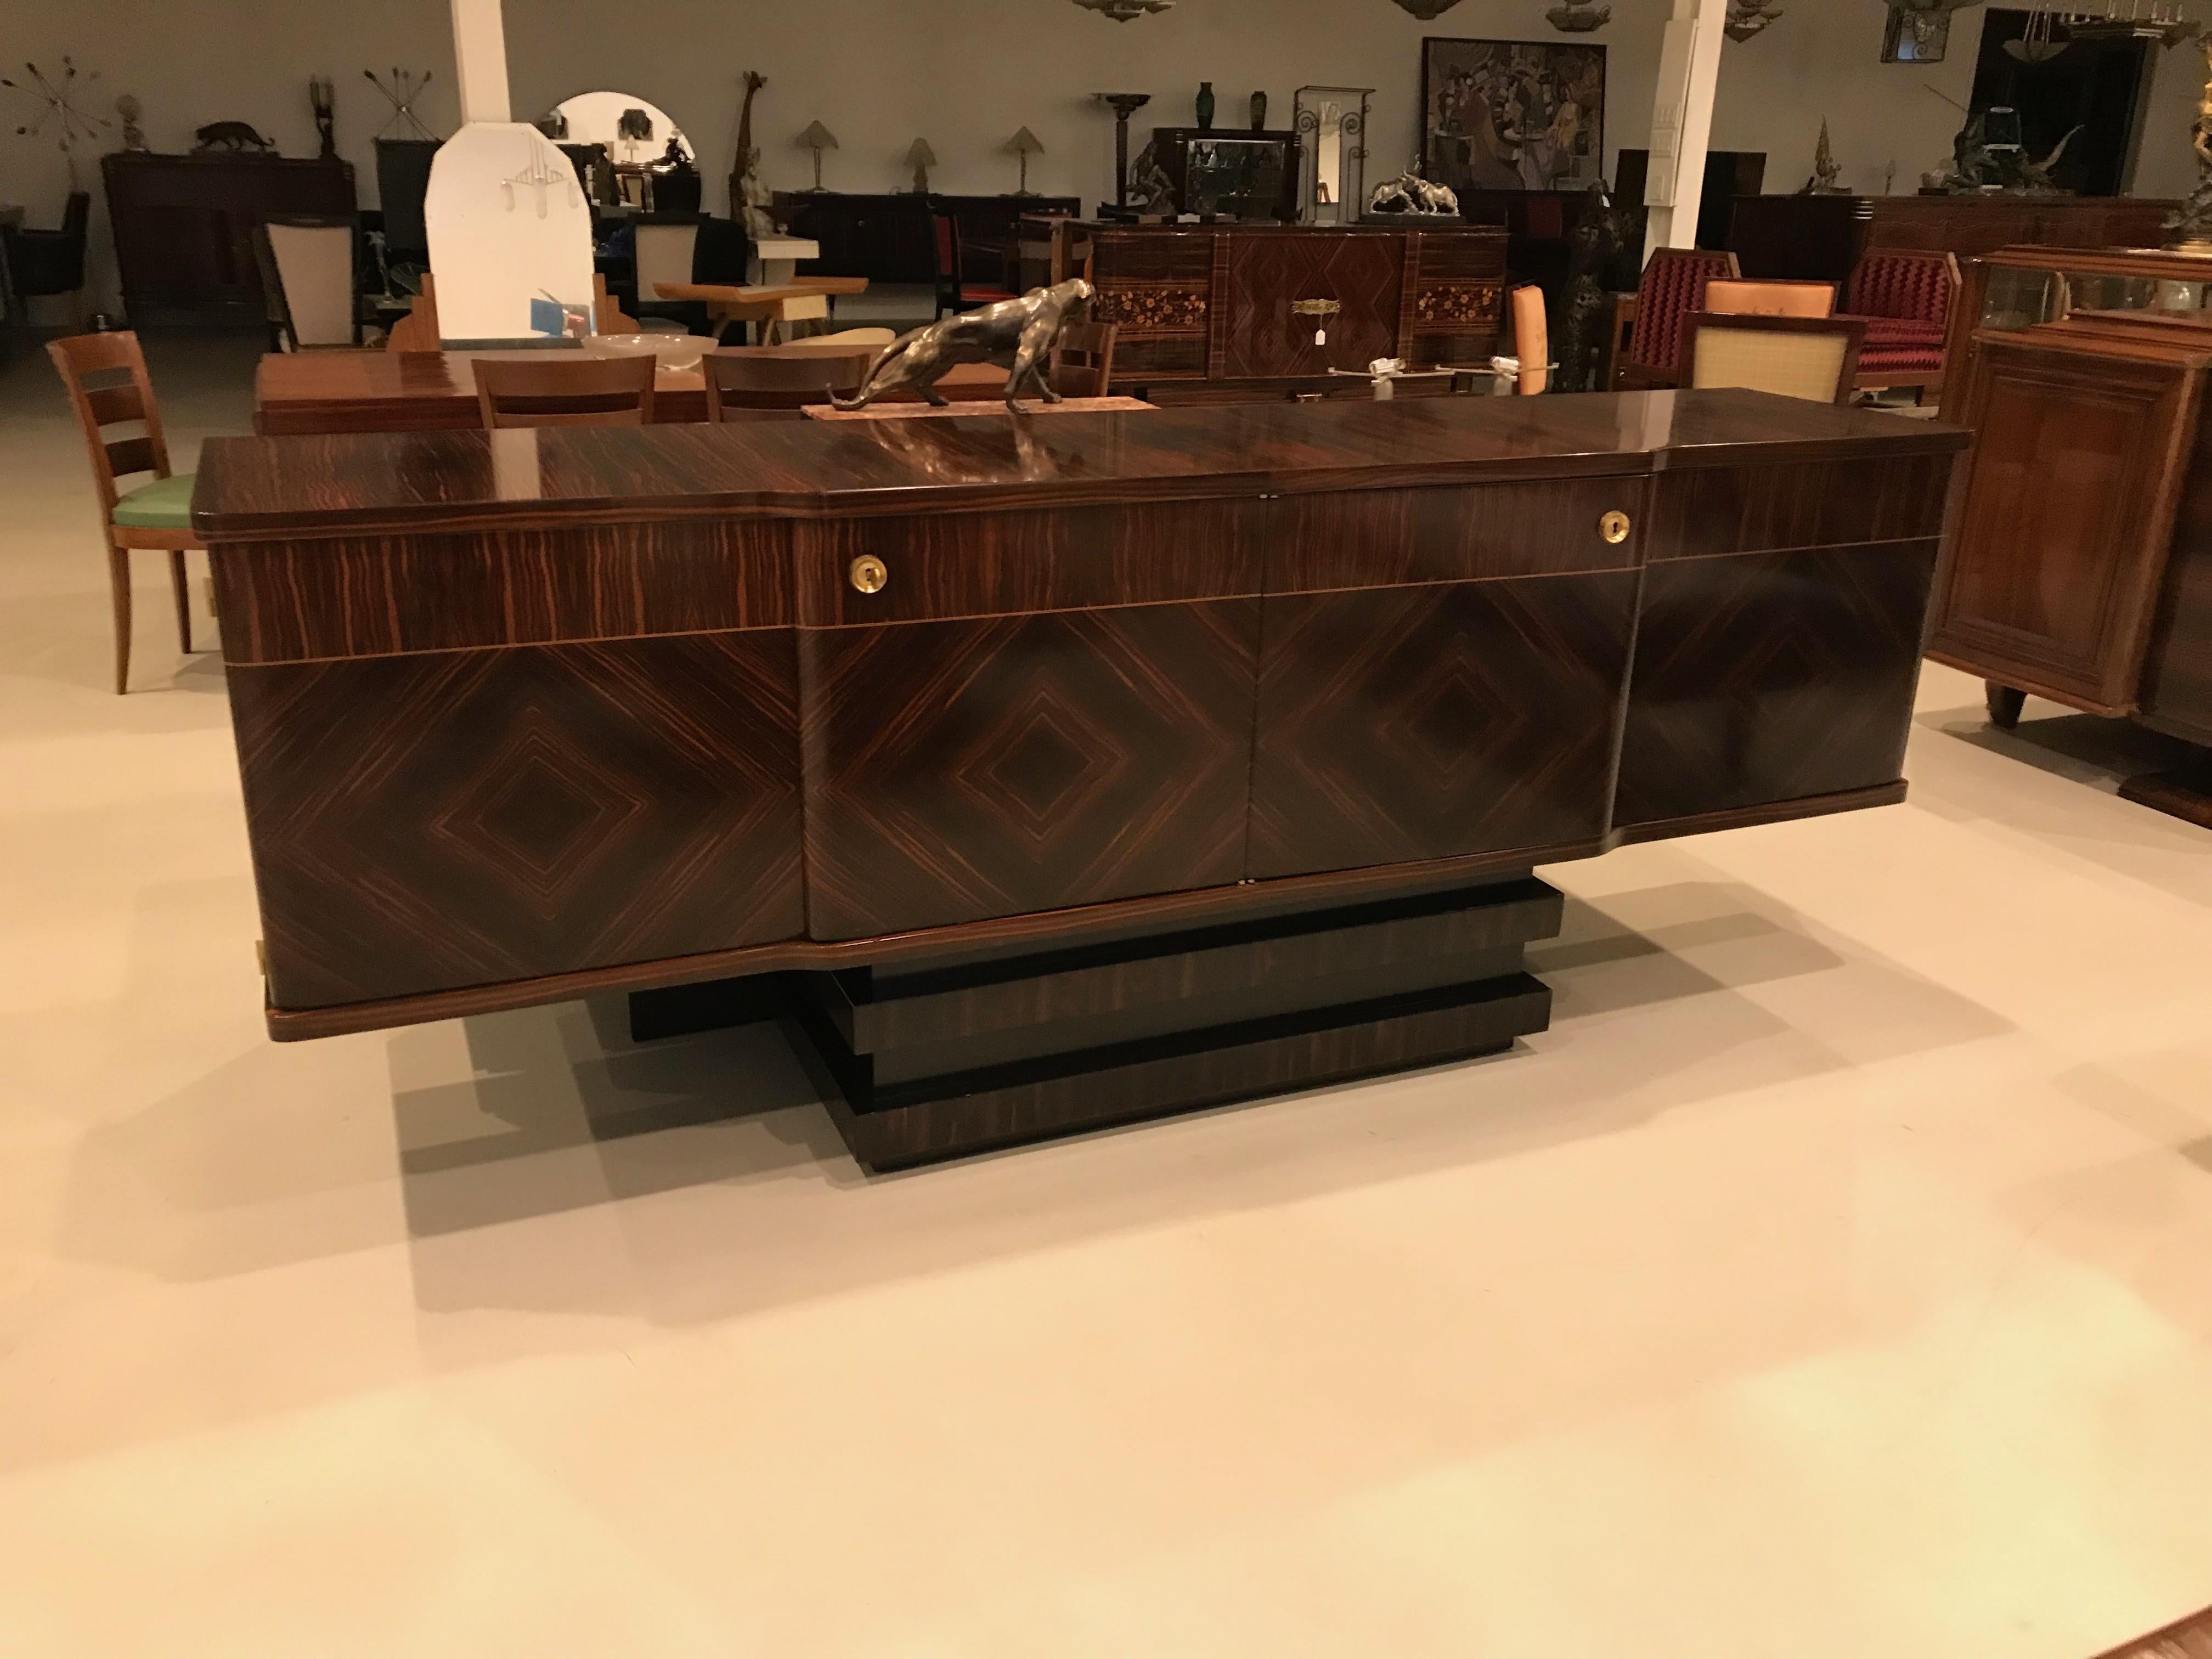 Stunning French Art Deco Macassar ebony sideboard or buffet with dry bar. Sitting on centre matching Macassar base the interior is lemon wood. Perfect credenza to add to your home for deco decor.